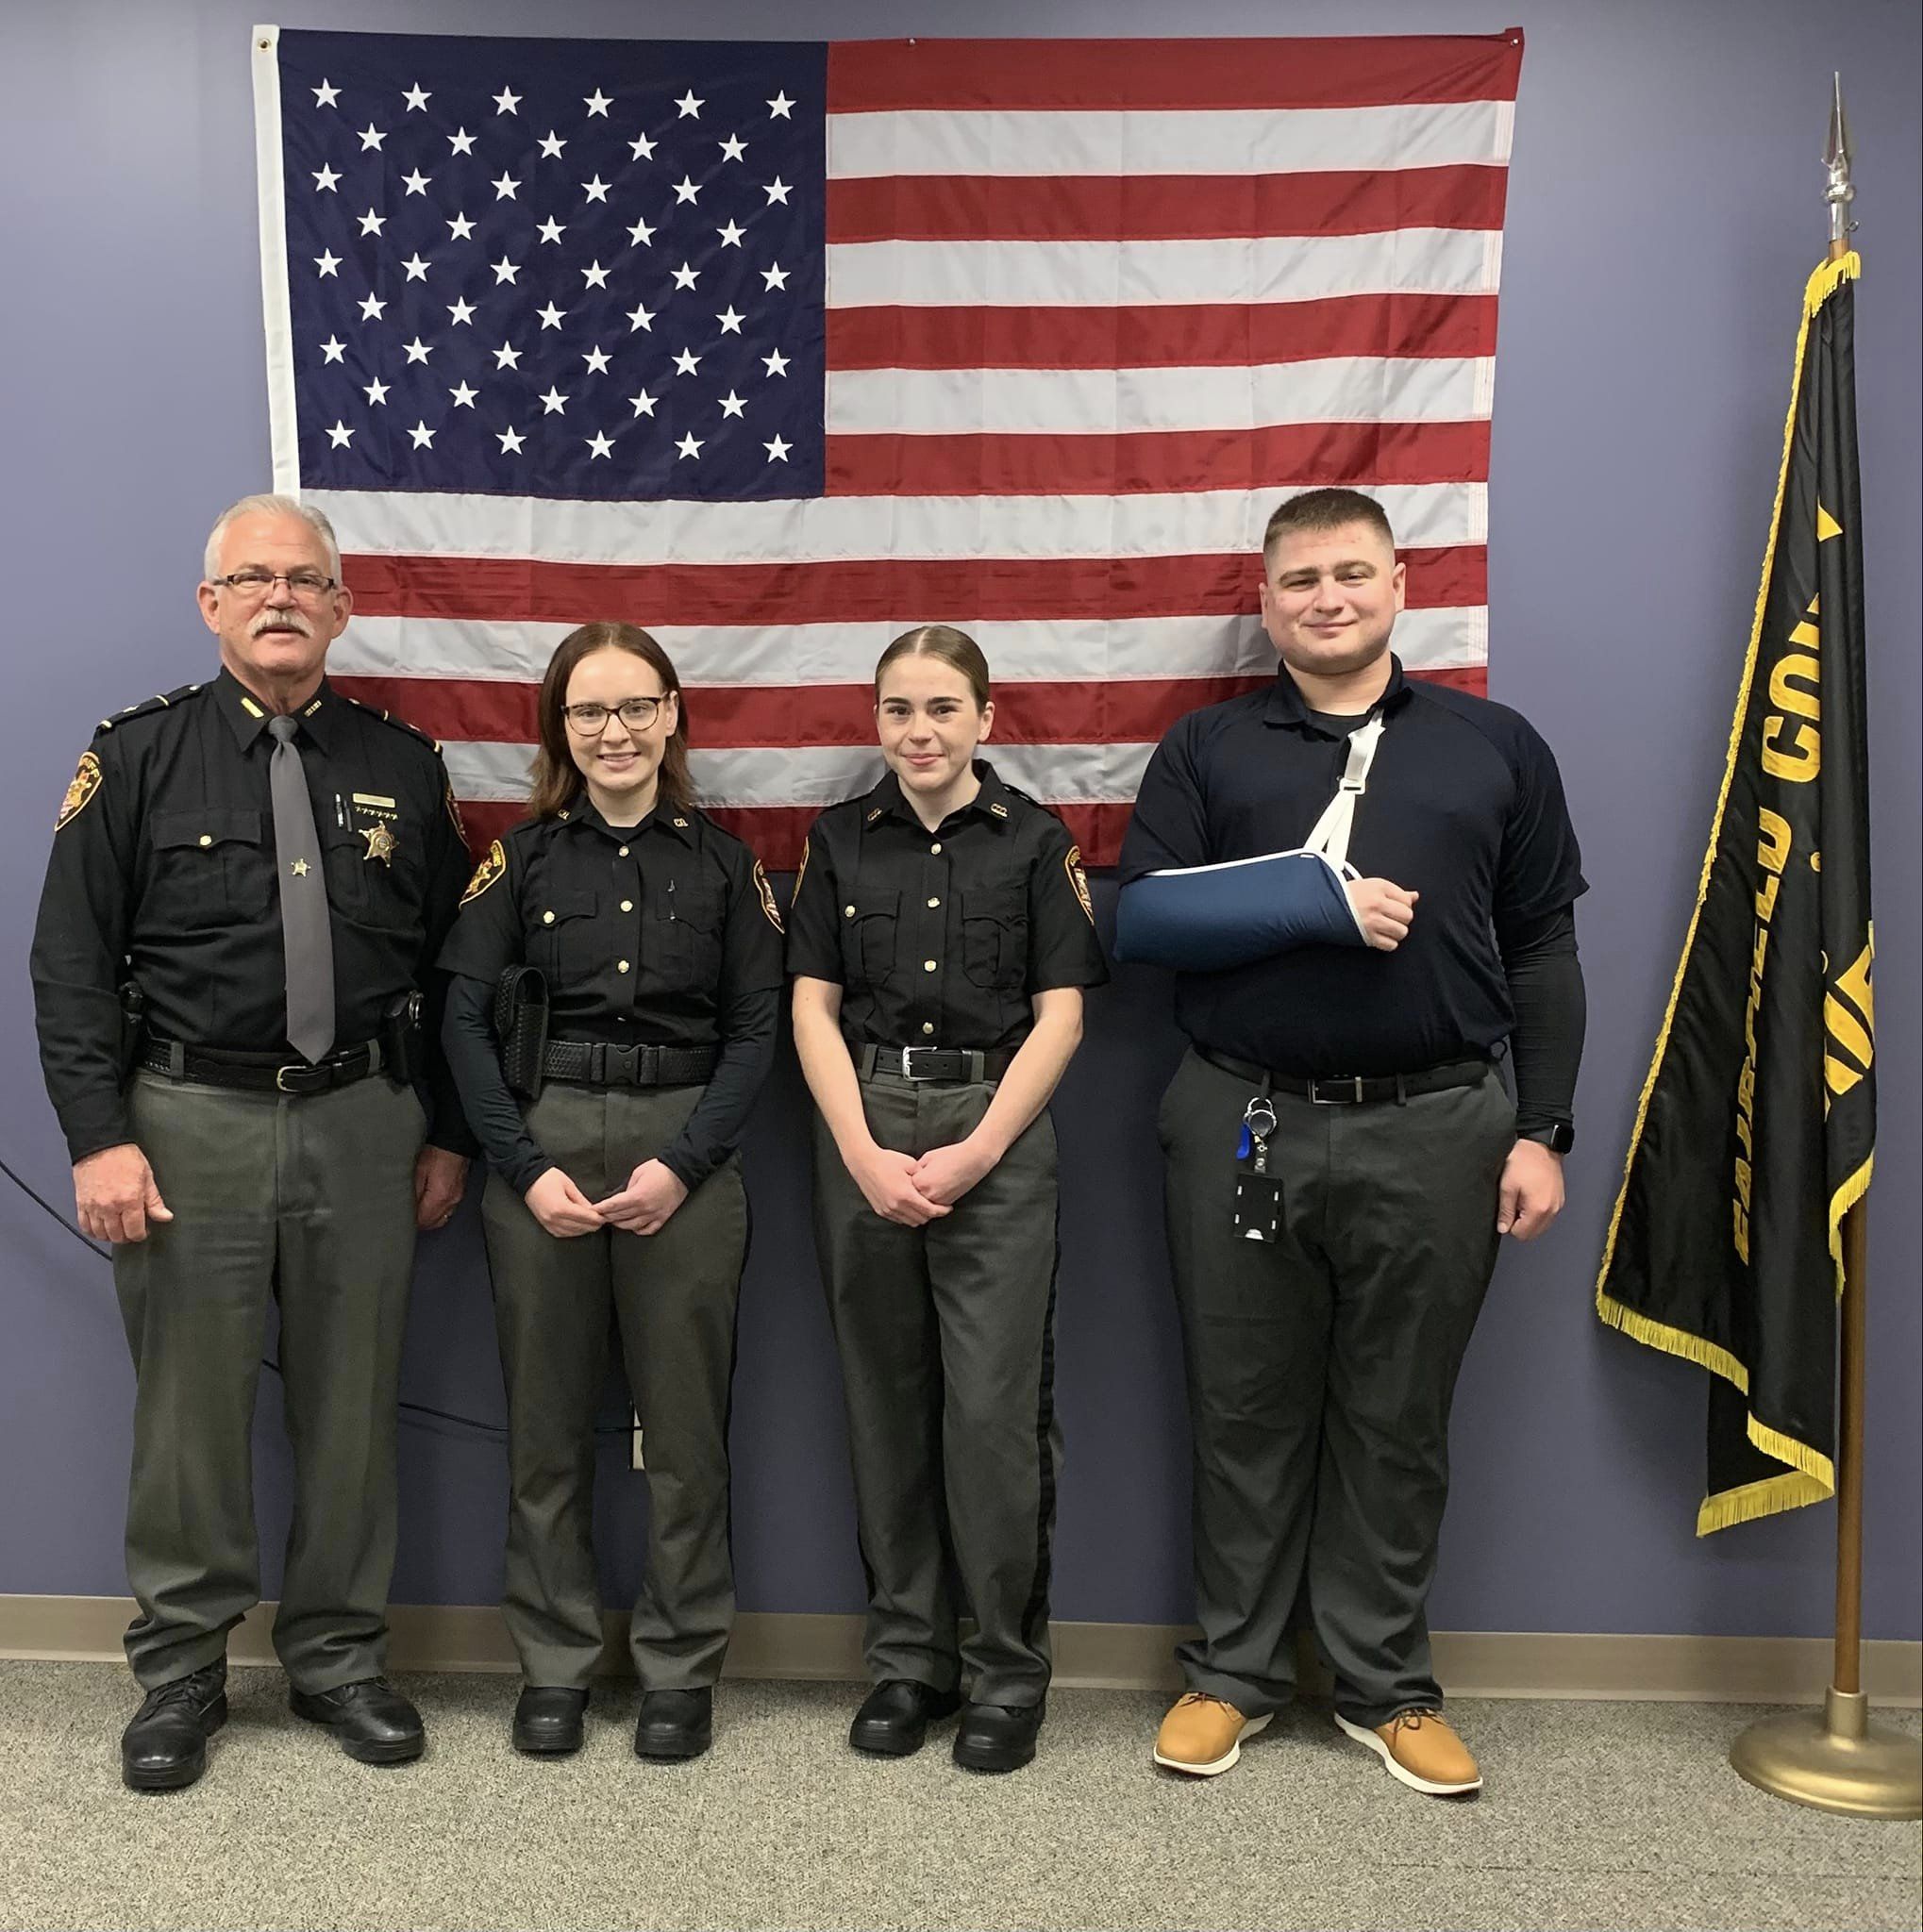 lape and new corrections officers